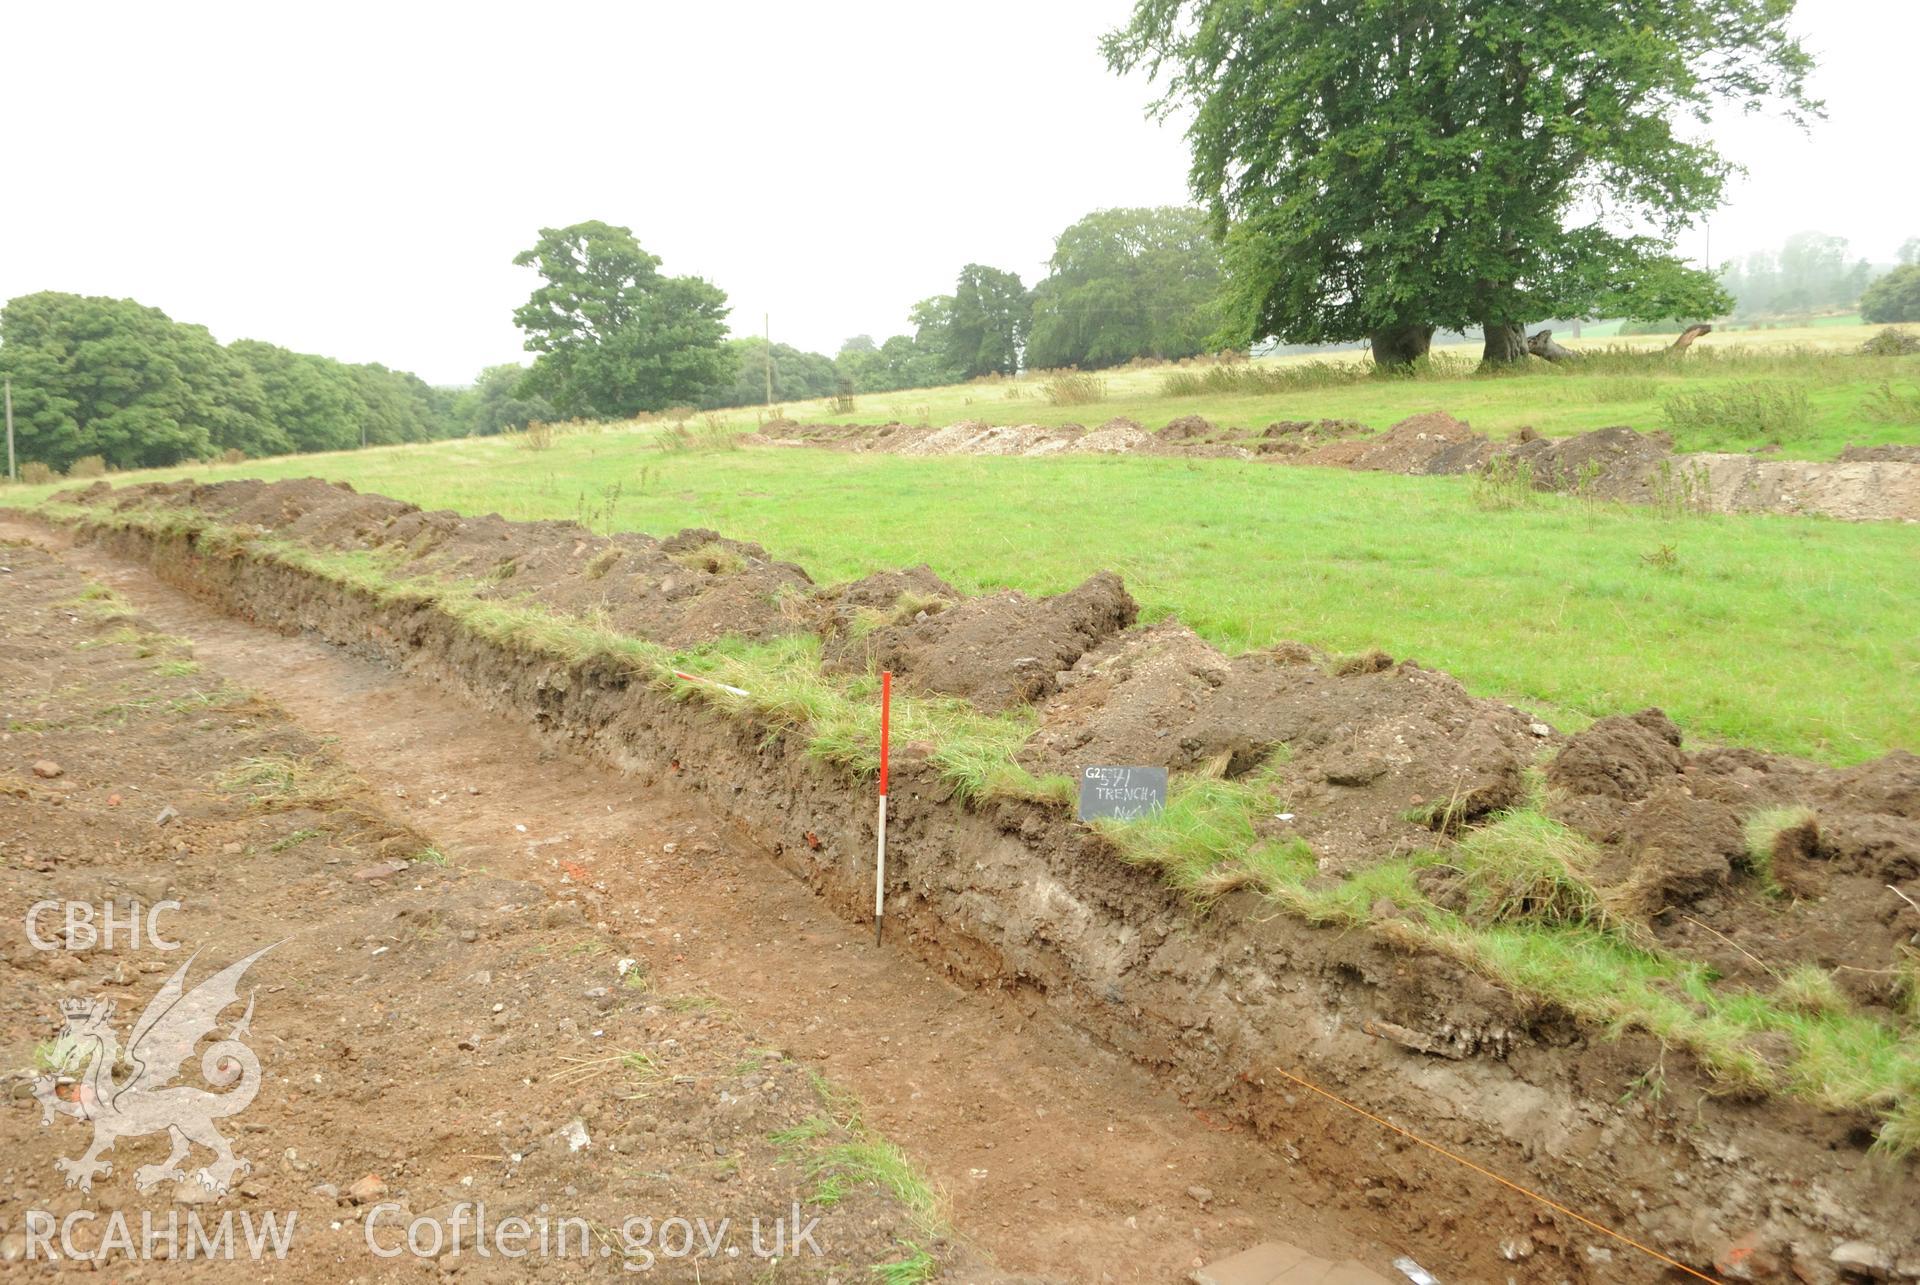 Oblique shot from the north east of Trench 1. Photographed during archaeological evaluation of Kinmel Park, Abergele, conducted by Gwynedd Archaeological Trust on 22nd August 2018. Project no. 2571.